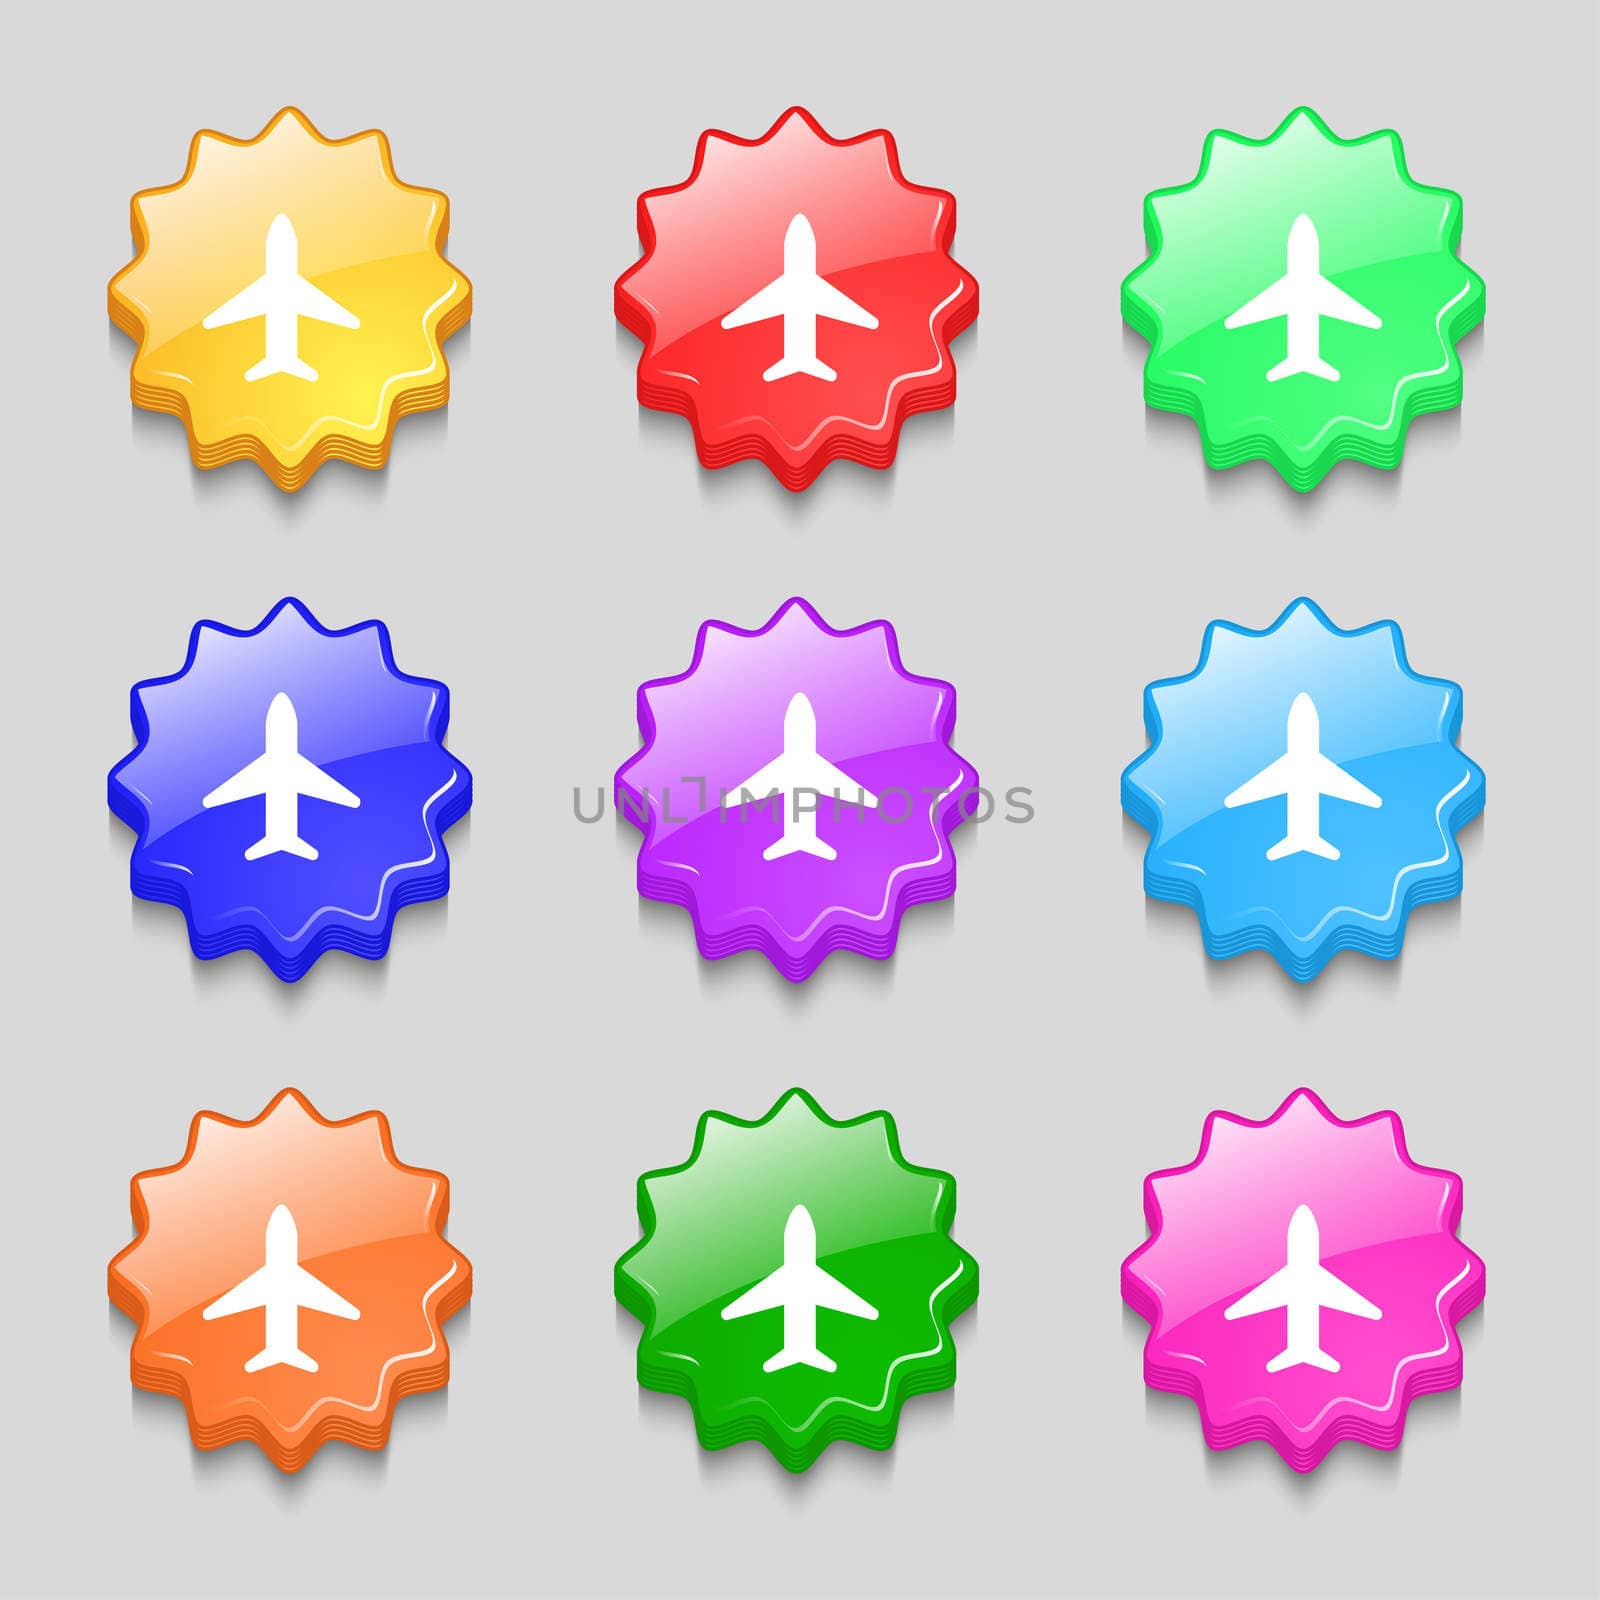 Airplane, Plane, Travel, Flight icon sign. symbol on nine wavy colourful buttons. illustration